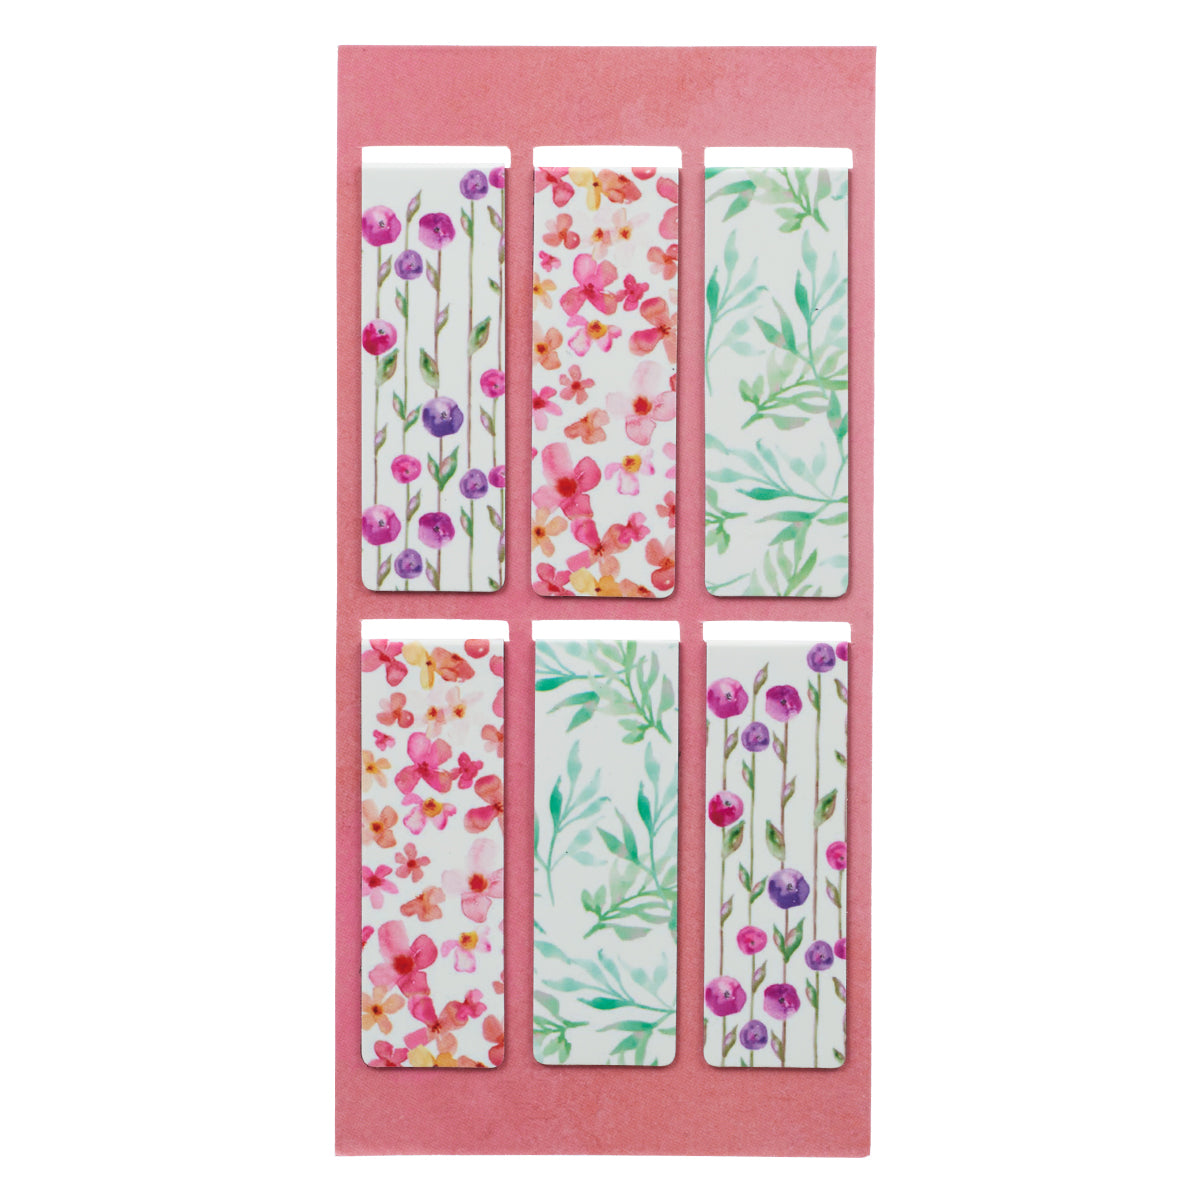 Blossoms of Blessings Magnetic Bookmark Set - The Christian Gift Company